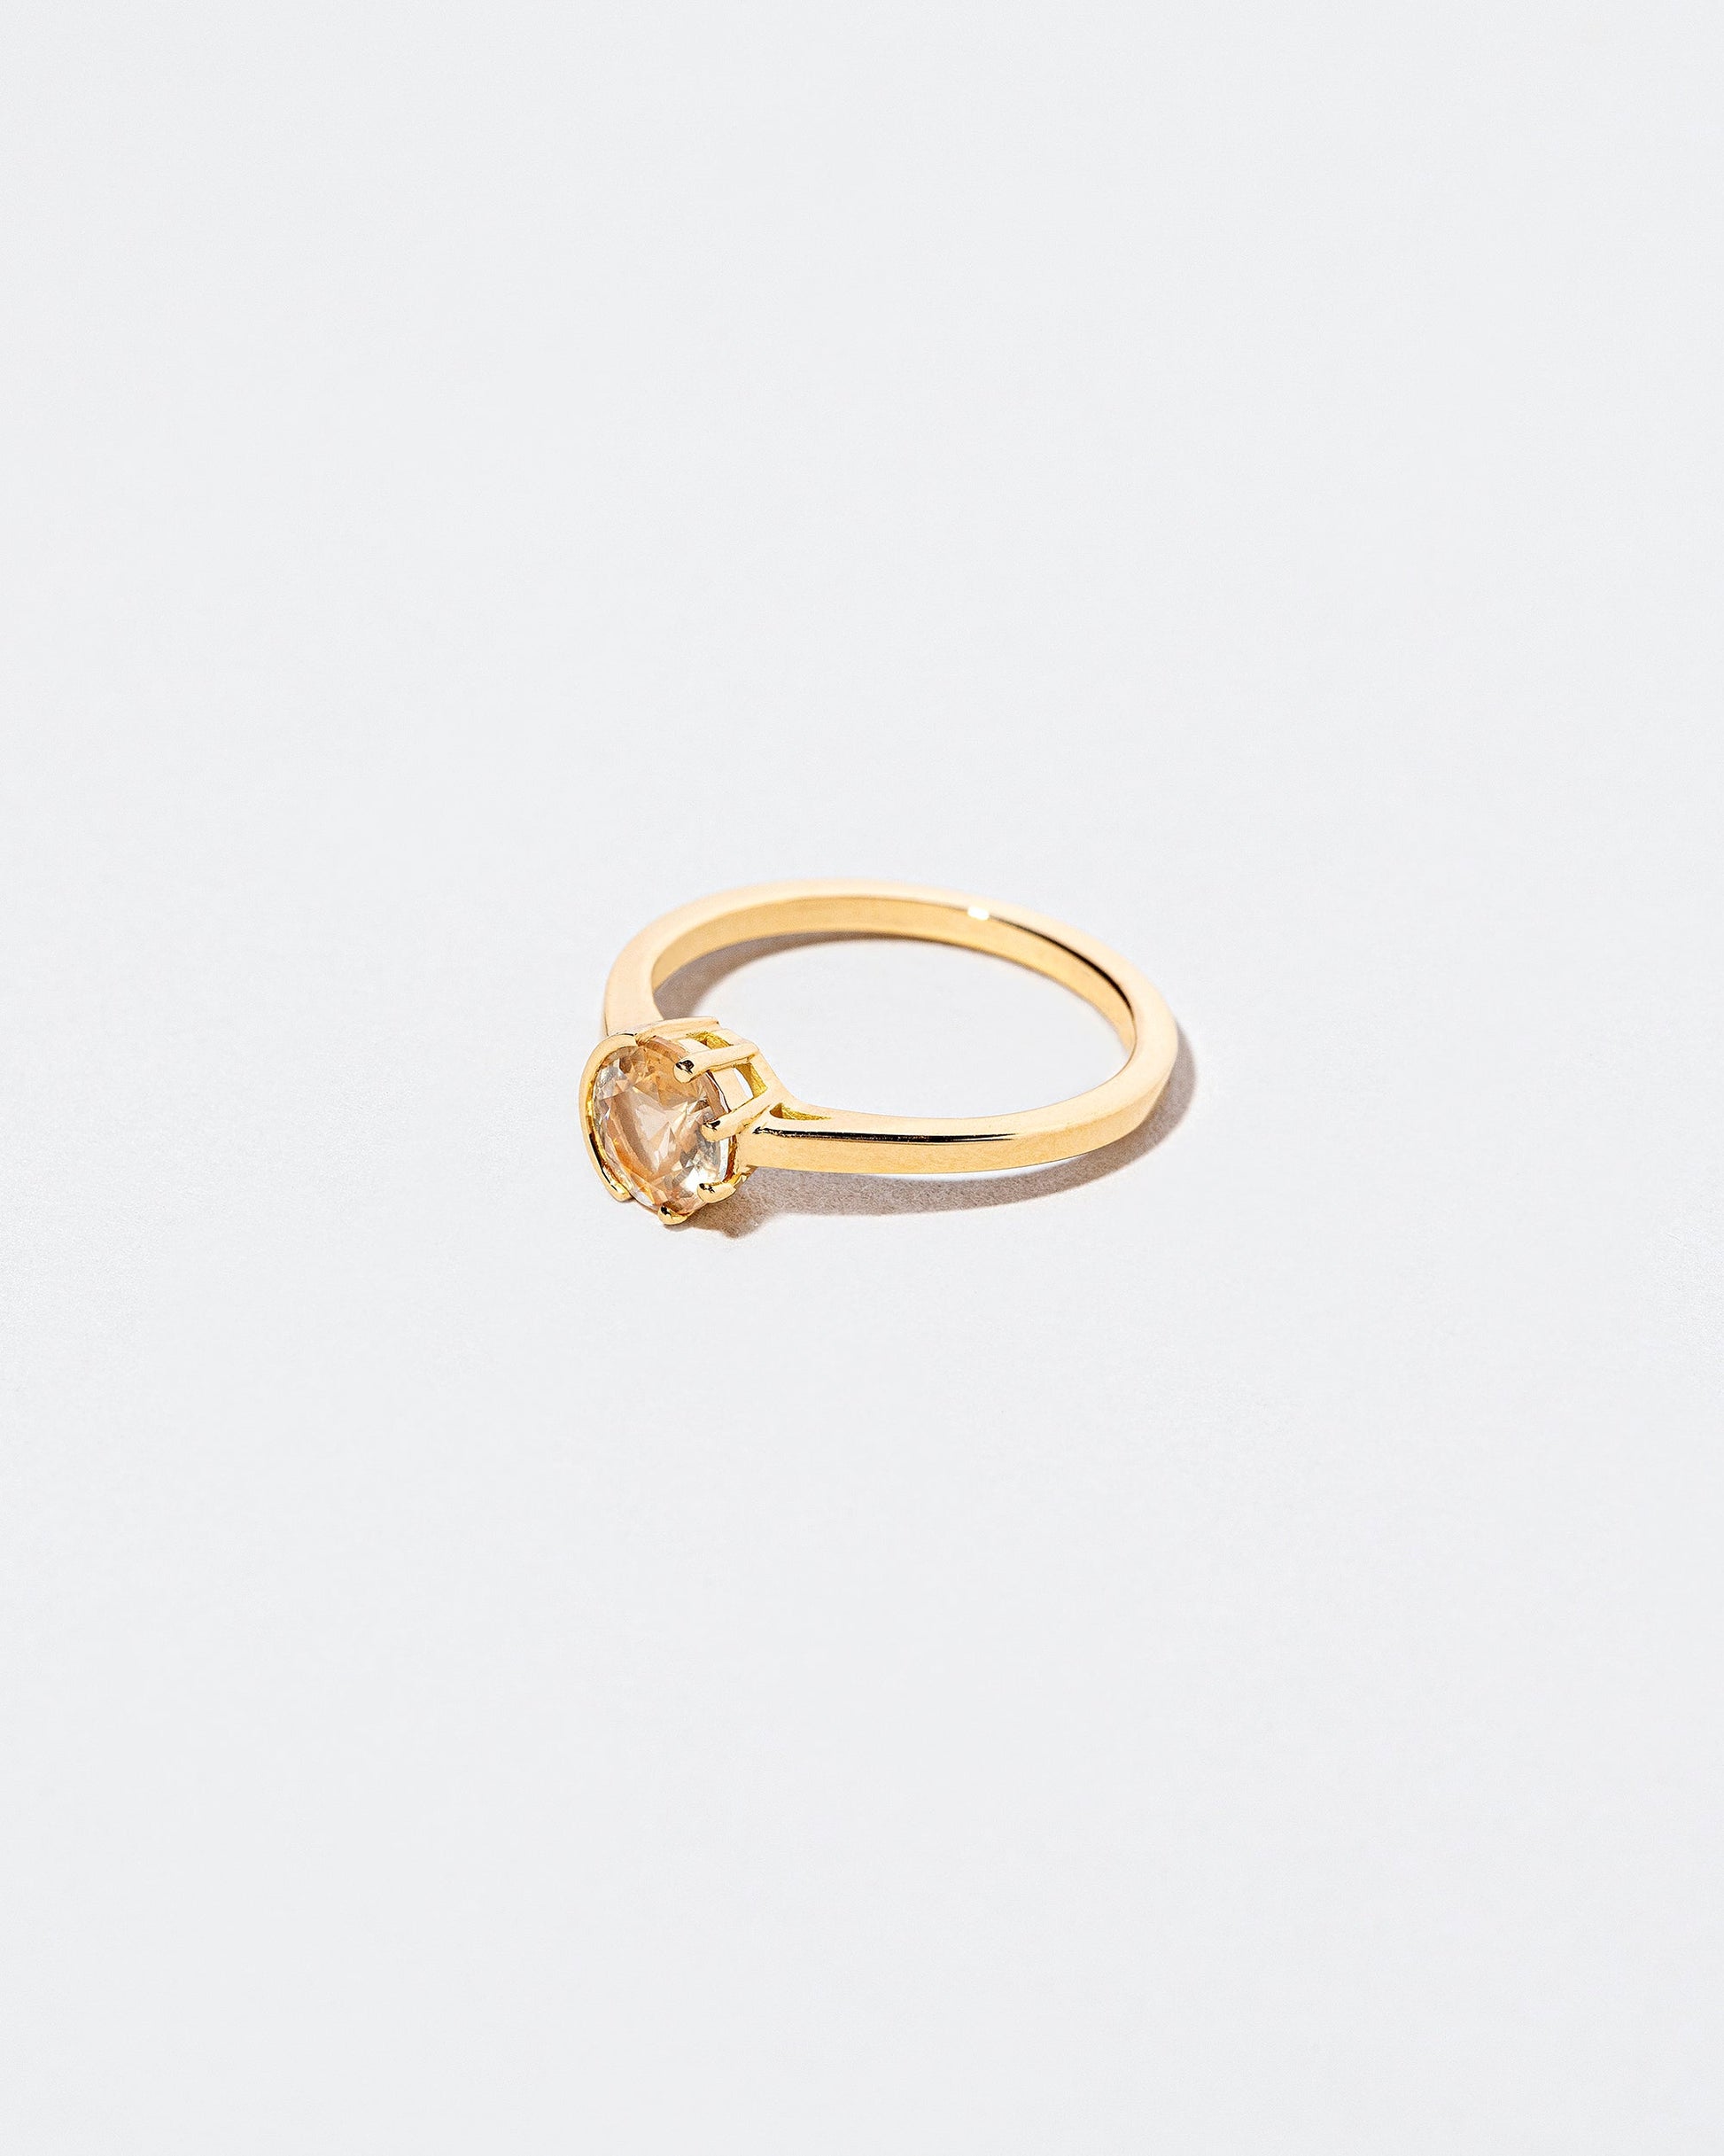  Sun & Moon Ring - Bicolor Yellow Sapphire on light color background.